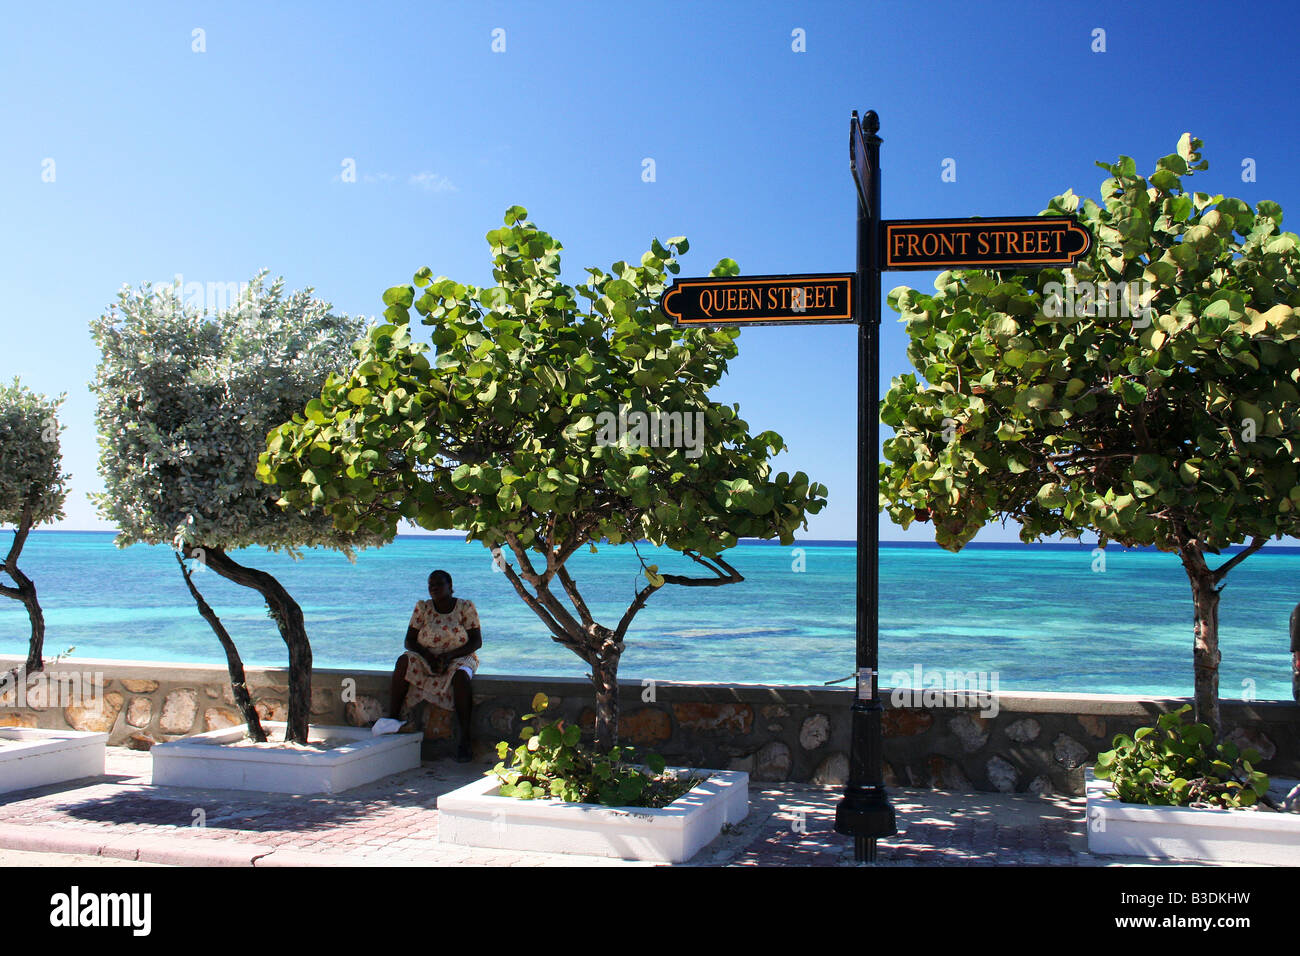 Sitting under a shady tree on Front Street, Cockburn Town, Turks and Caicos Islands Stock Photo